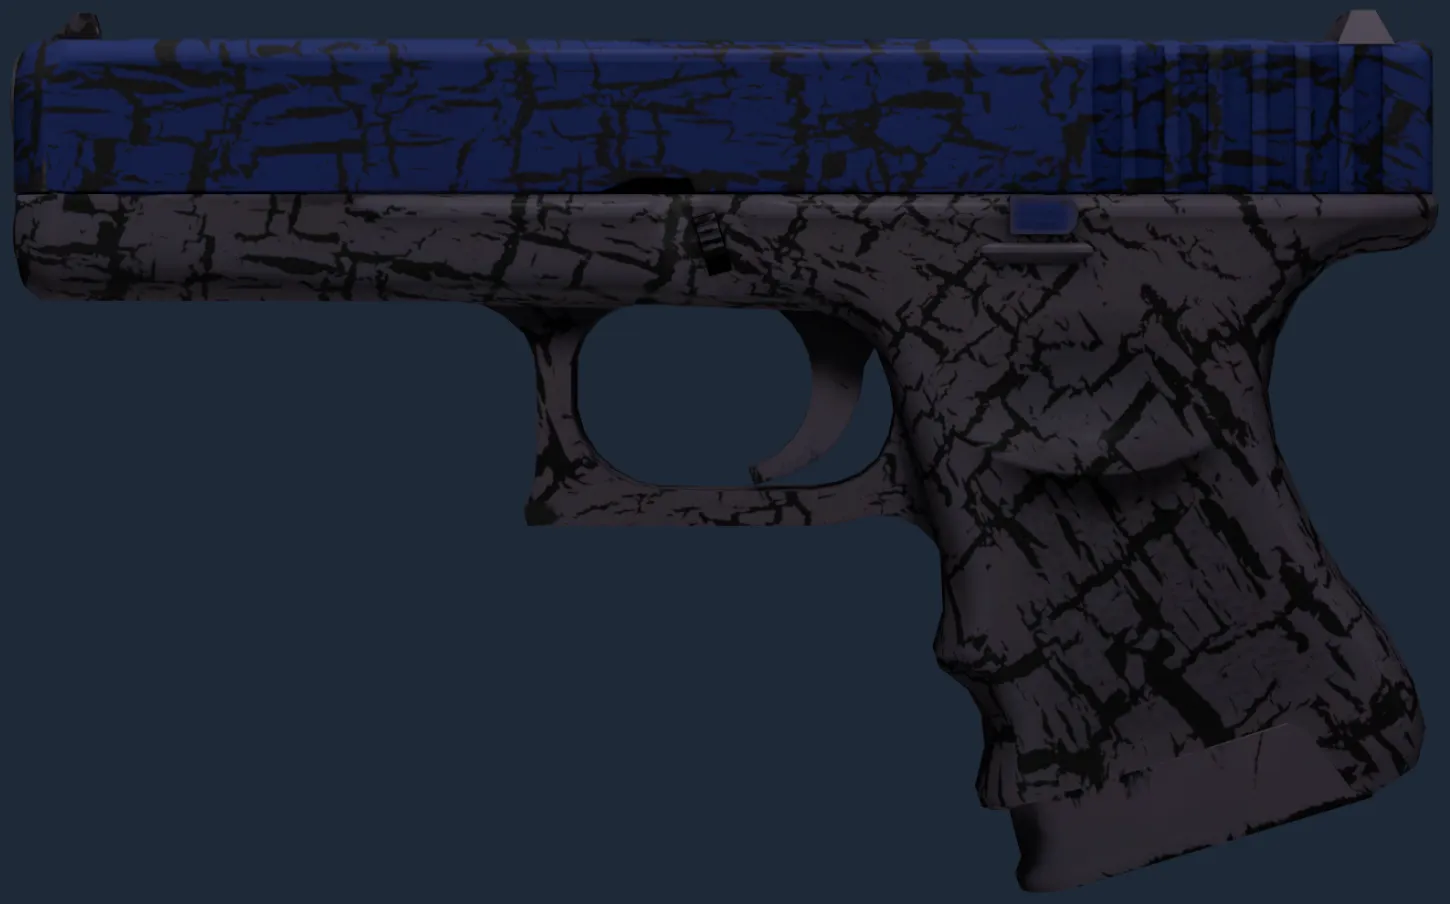 Glock-18 | Blue Fissure (Factory New)